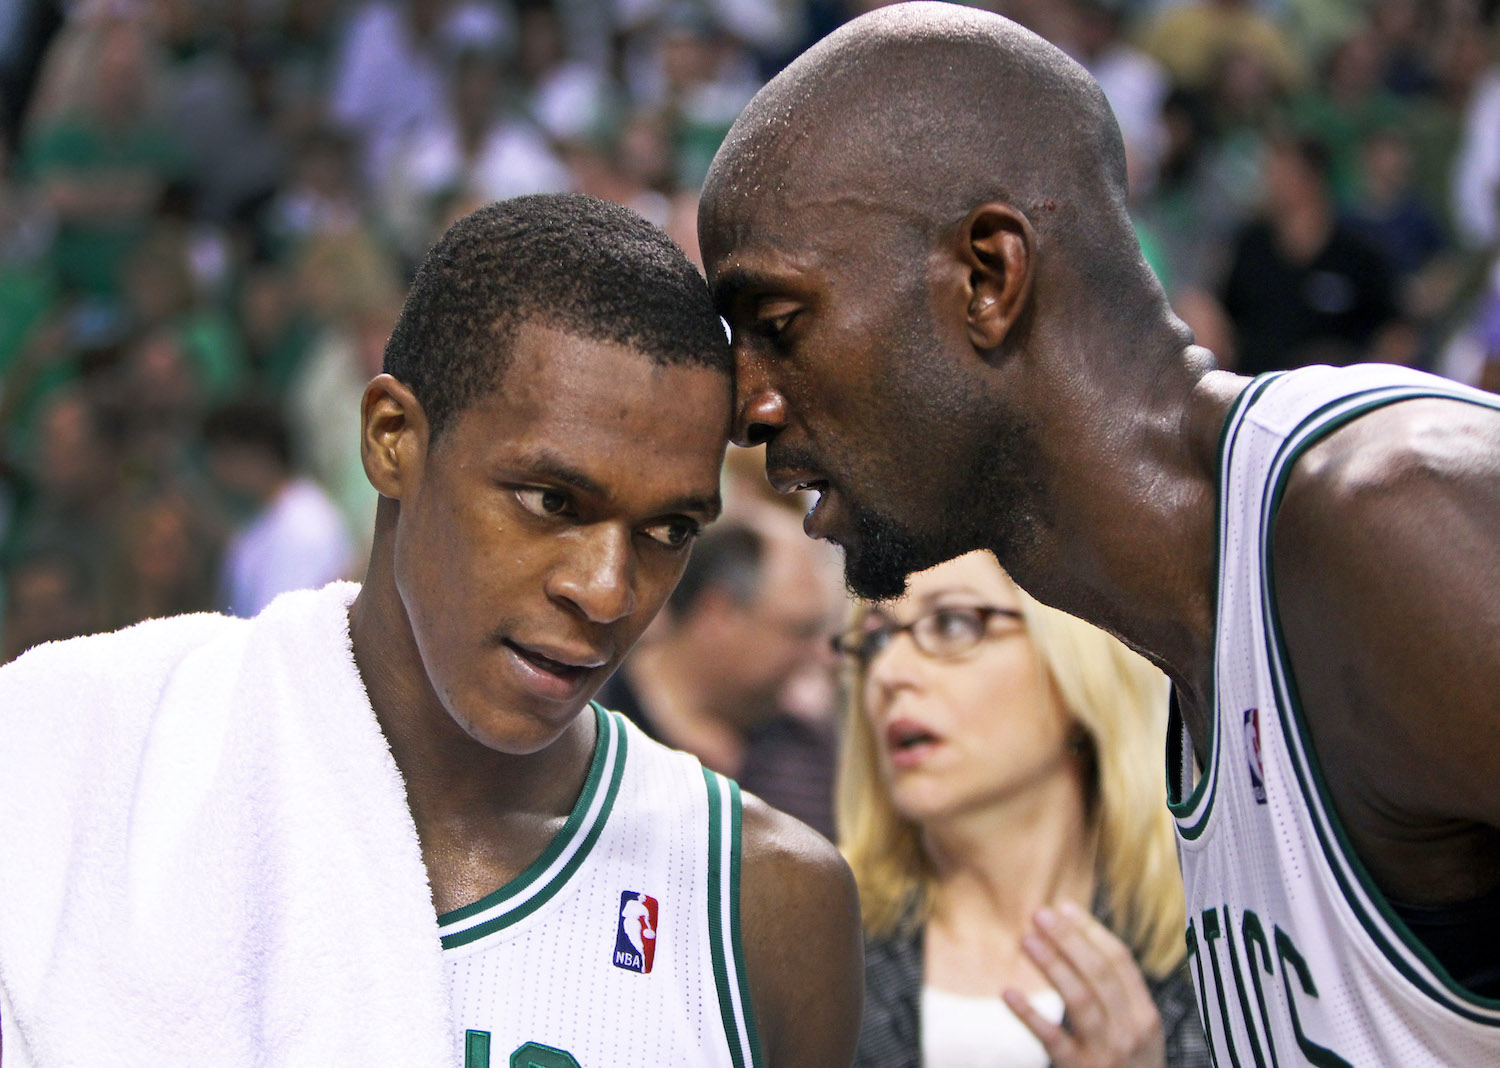 Kevin Garnett (R) whispers to Rajon Rondo (L) during their time with the Boston Celtics.